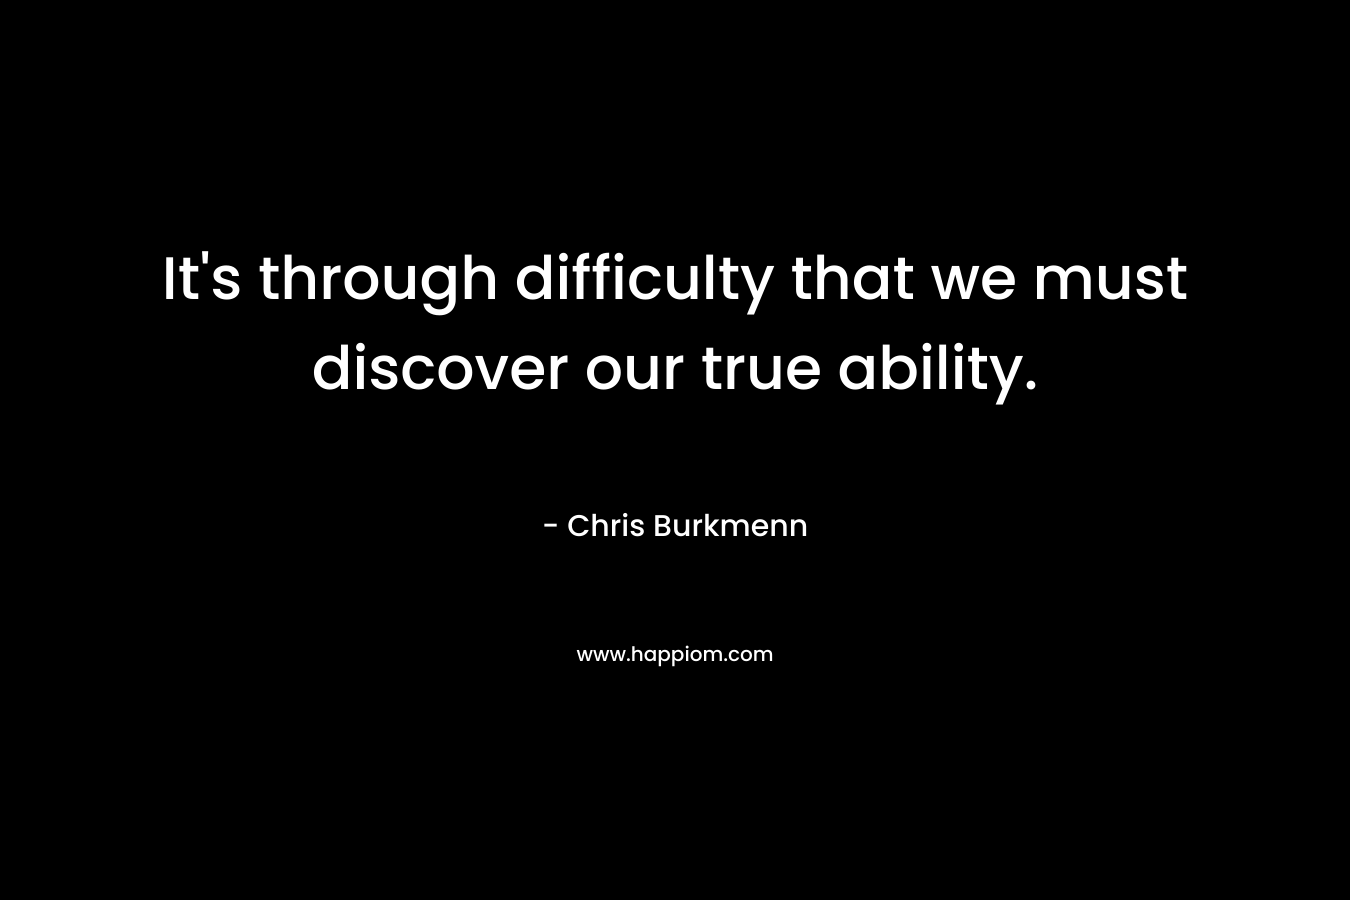 It's through difficulty that we must discover our true ability.